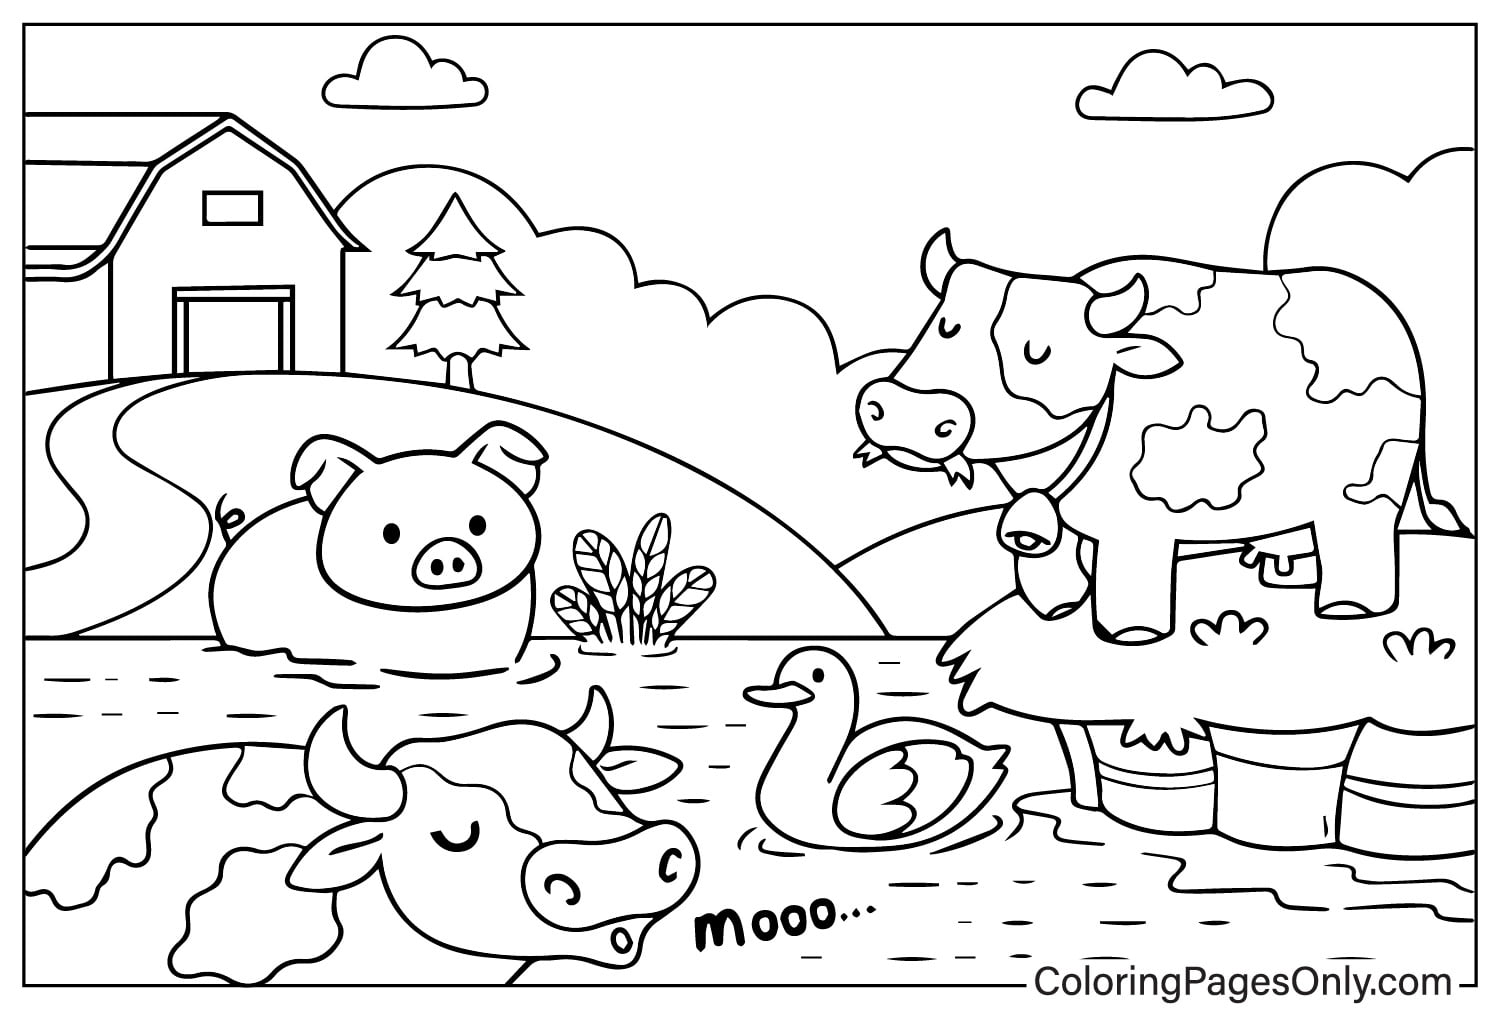 Animal Farm with Cows Pork Pig and Duck - Free Printable Coloring Pages